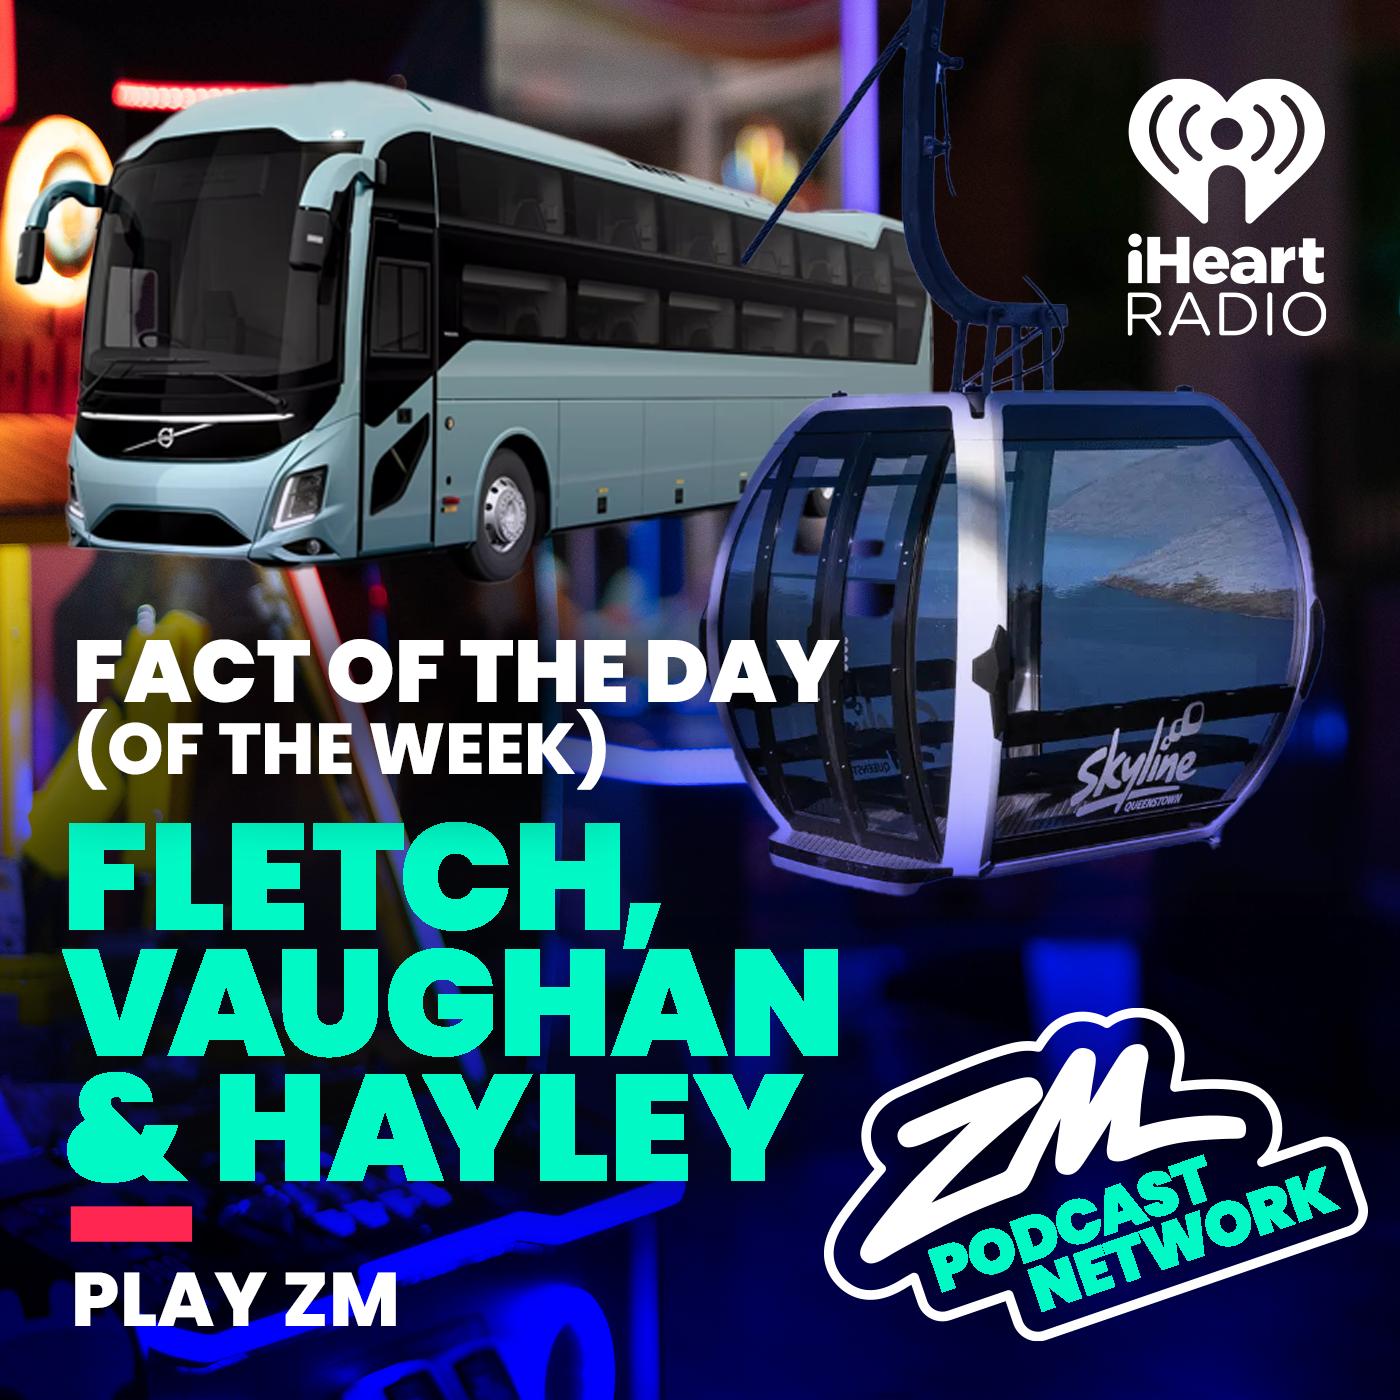 Fletch, Vaughan & Hayley’s Fact of the Day (of the Week!) - Public Transport!